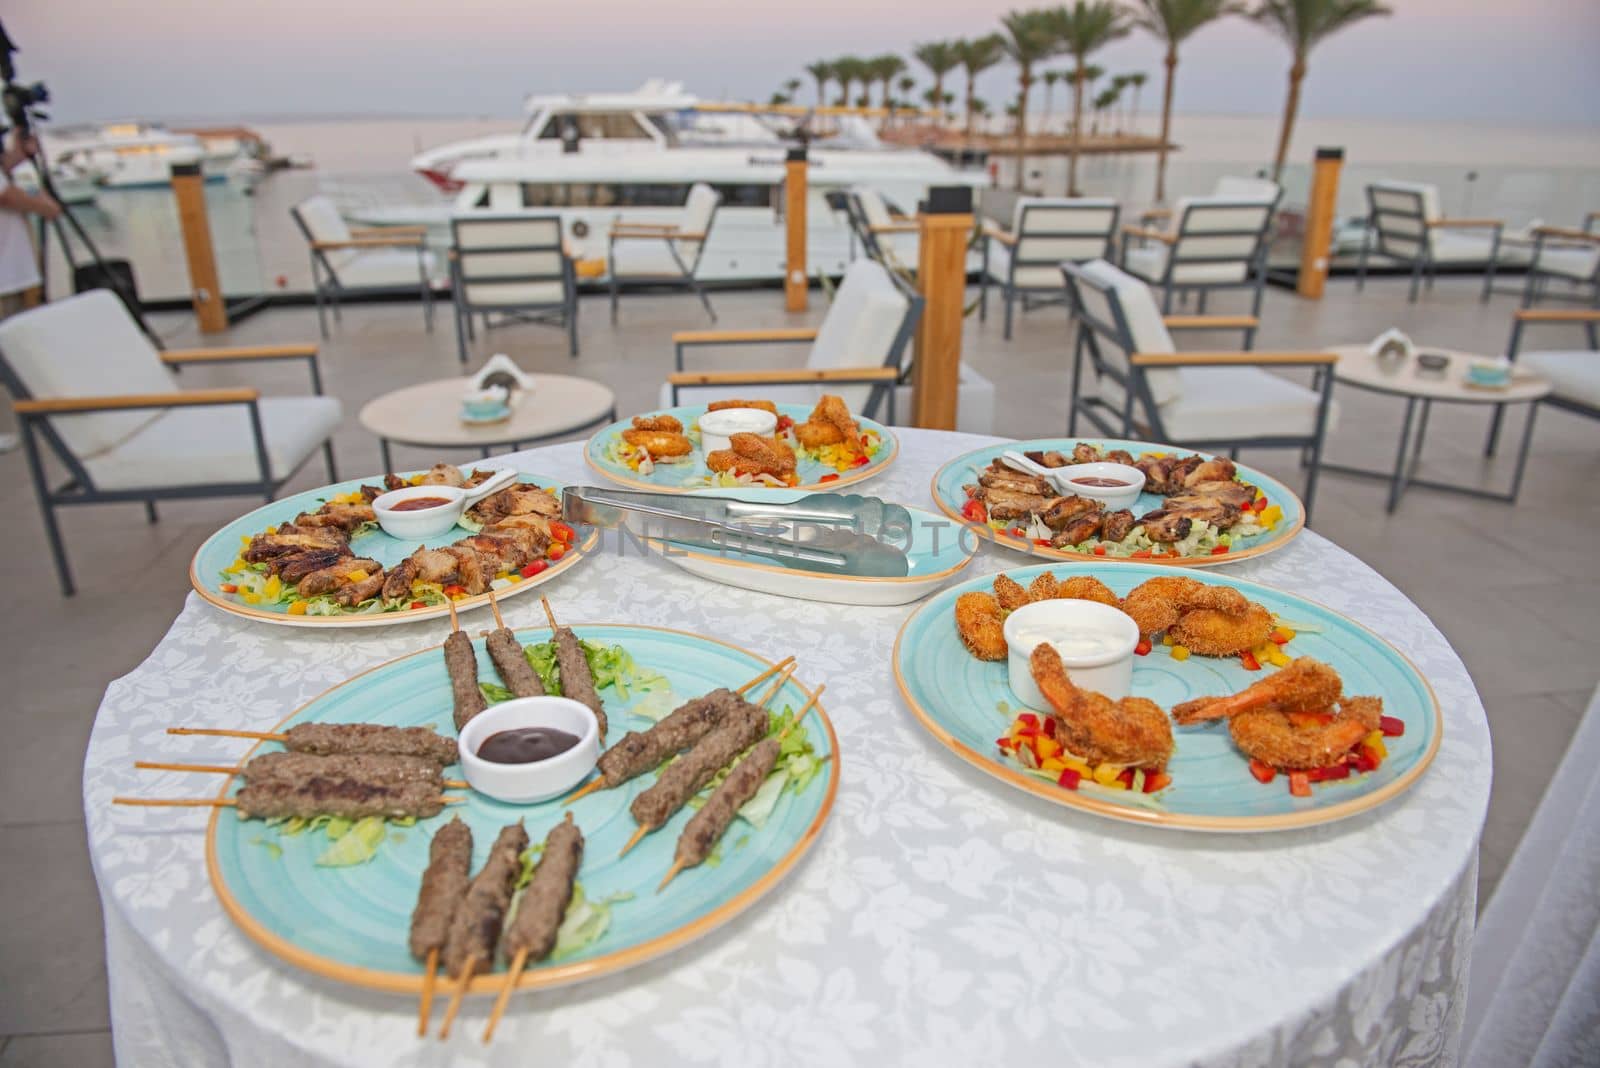 Selection display of meat dishes and finger food on a table at luxury outdoor restaurant buffet area with marina view